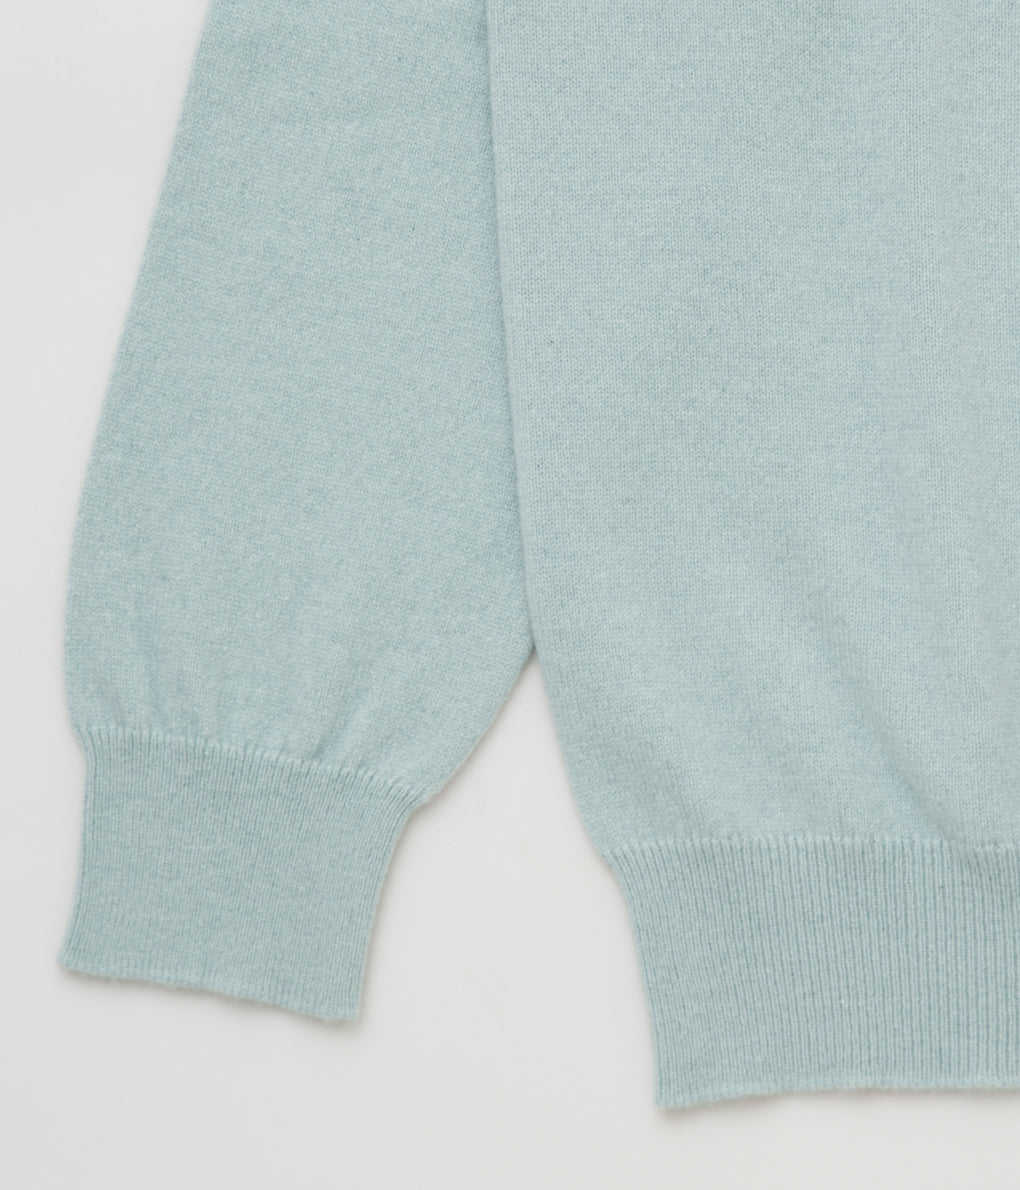 JOHNSTONS "CLASSIC CASHMERE VEE NECK CARDIGAN" (FROST)